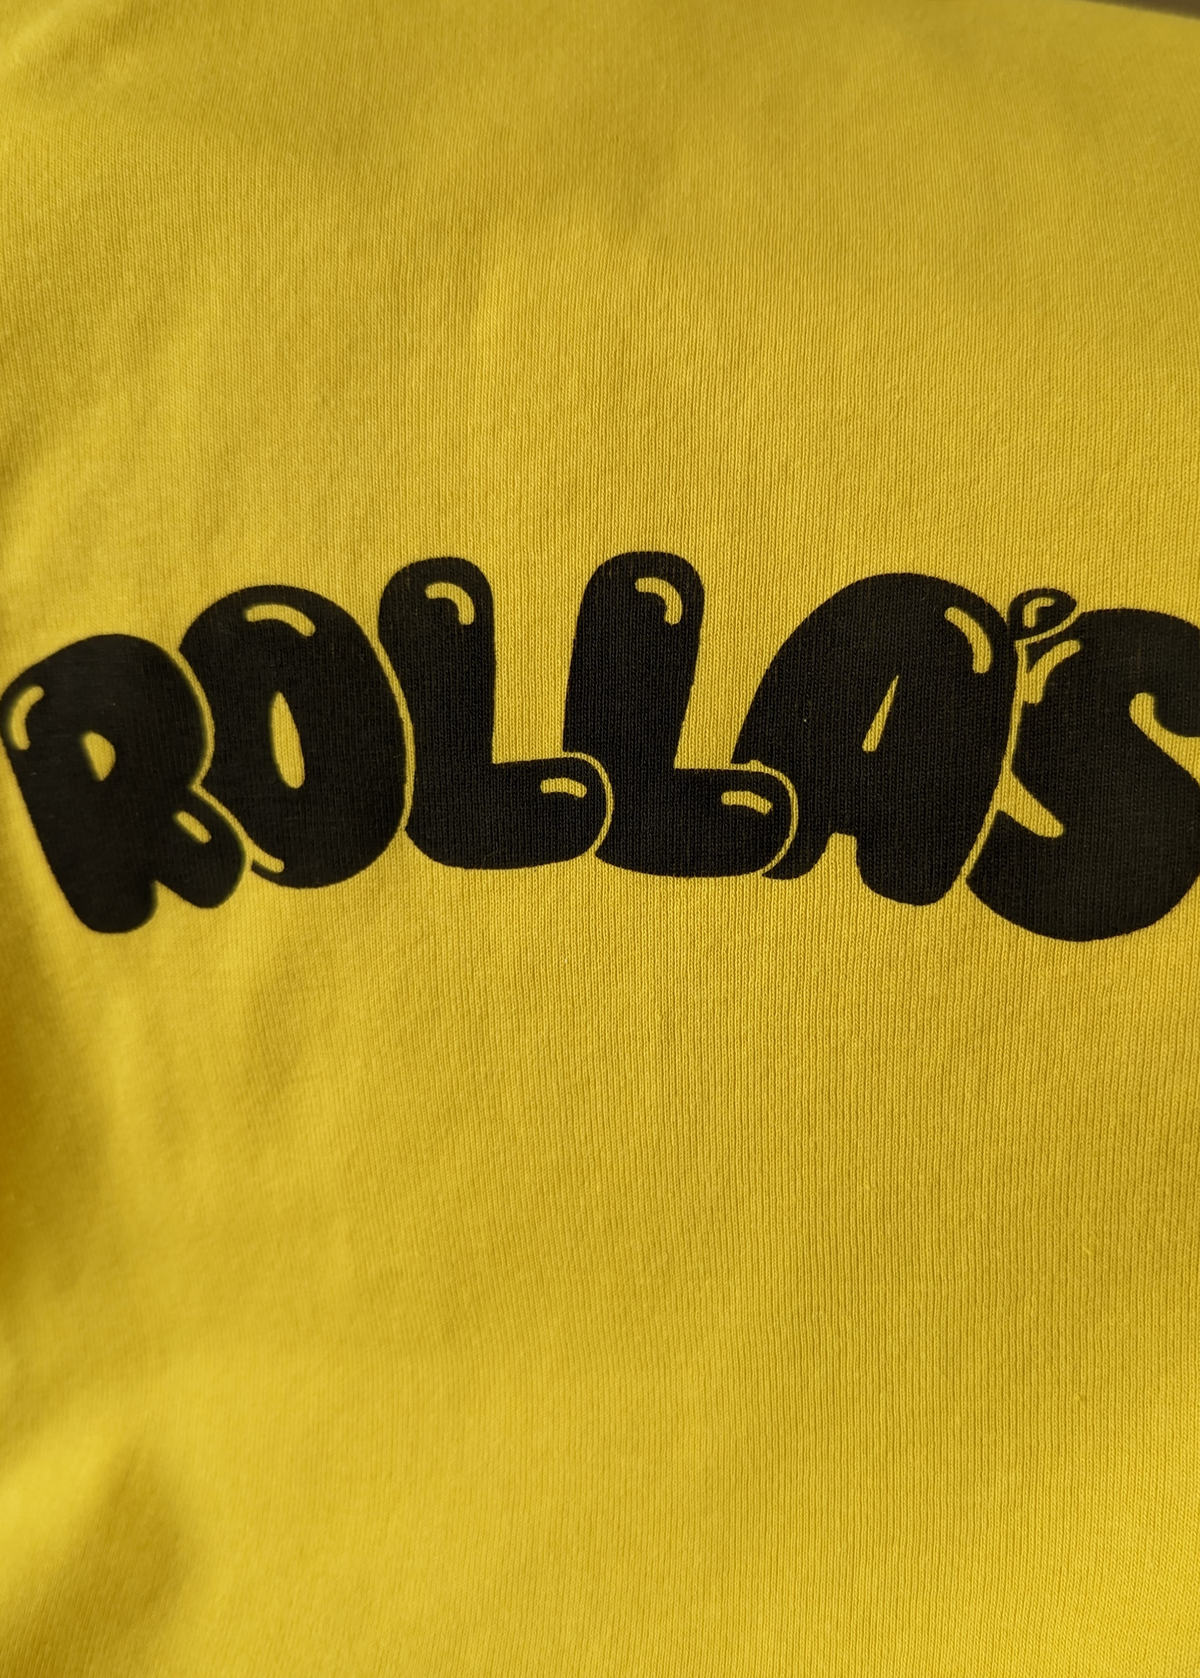 70s inspired golden yellow rib ringer tee with Rolla's bubble graphics at front in black, by Rolla's Jeans